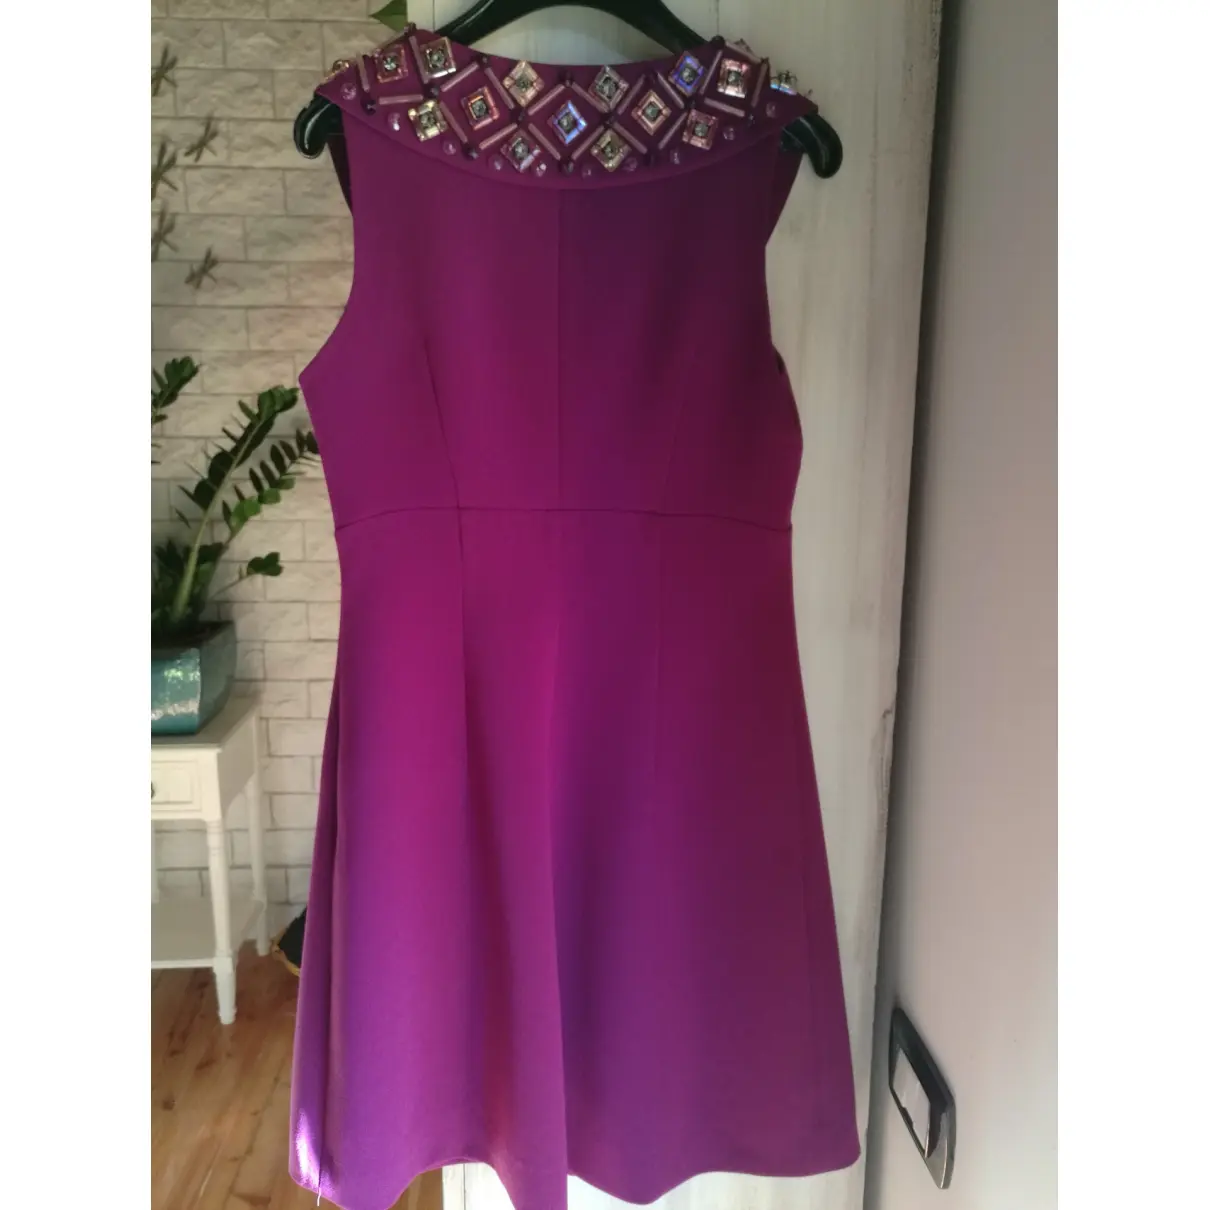 Moschino Cheap And Chic Dress for sale